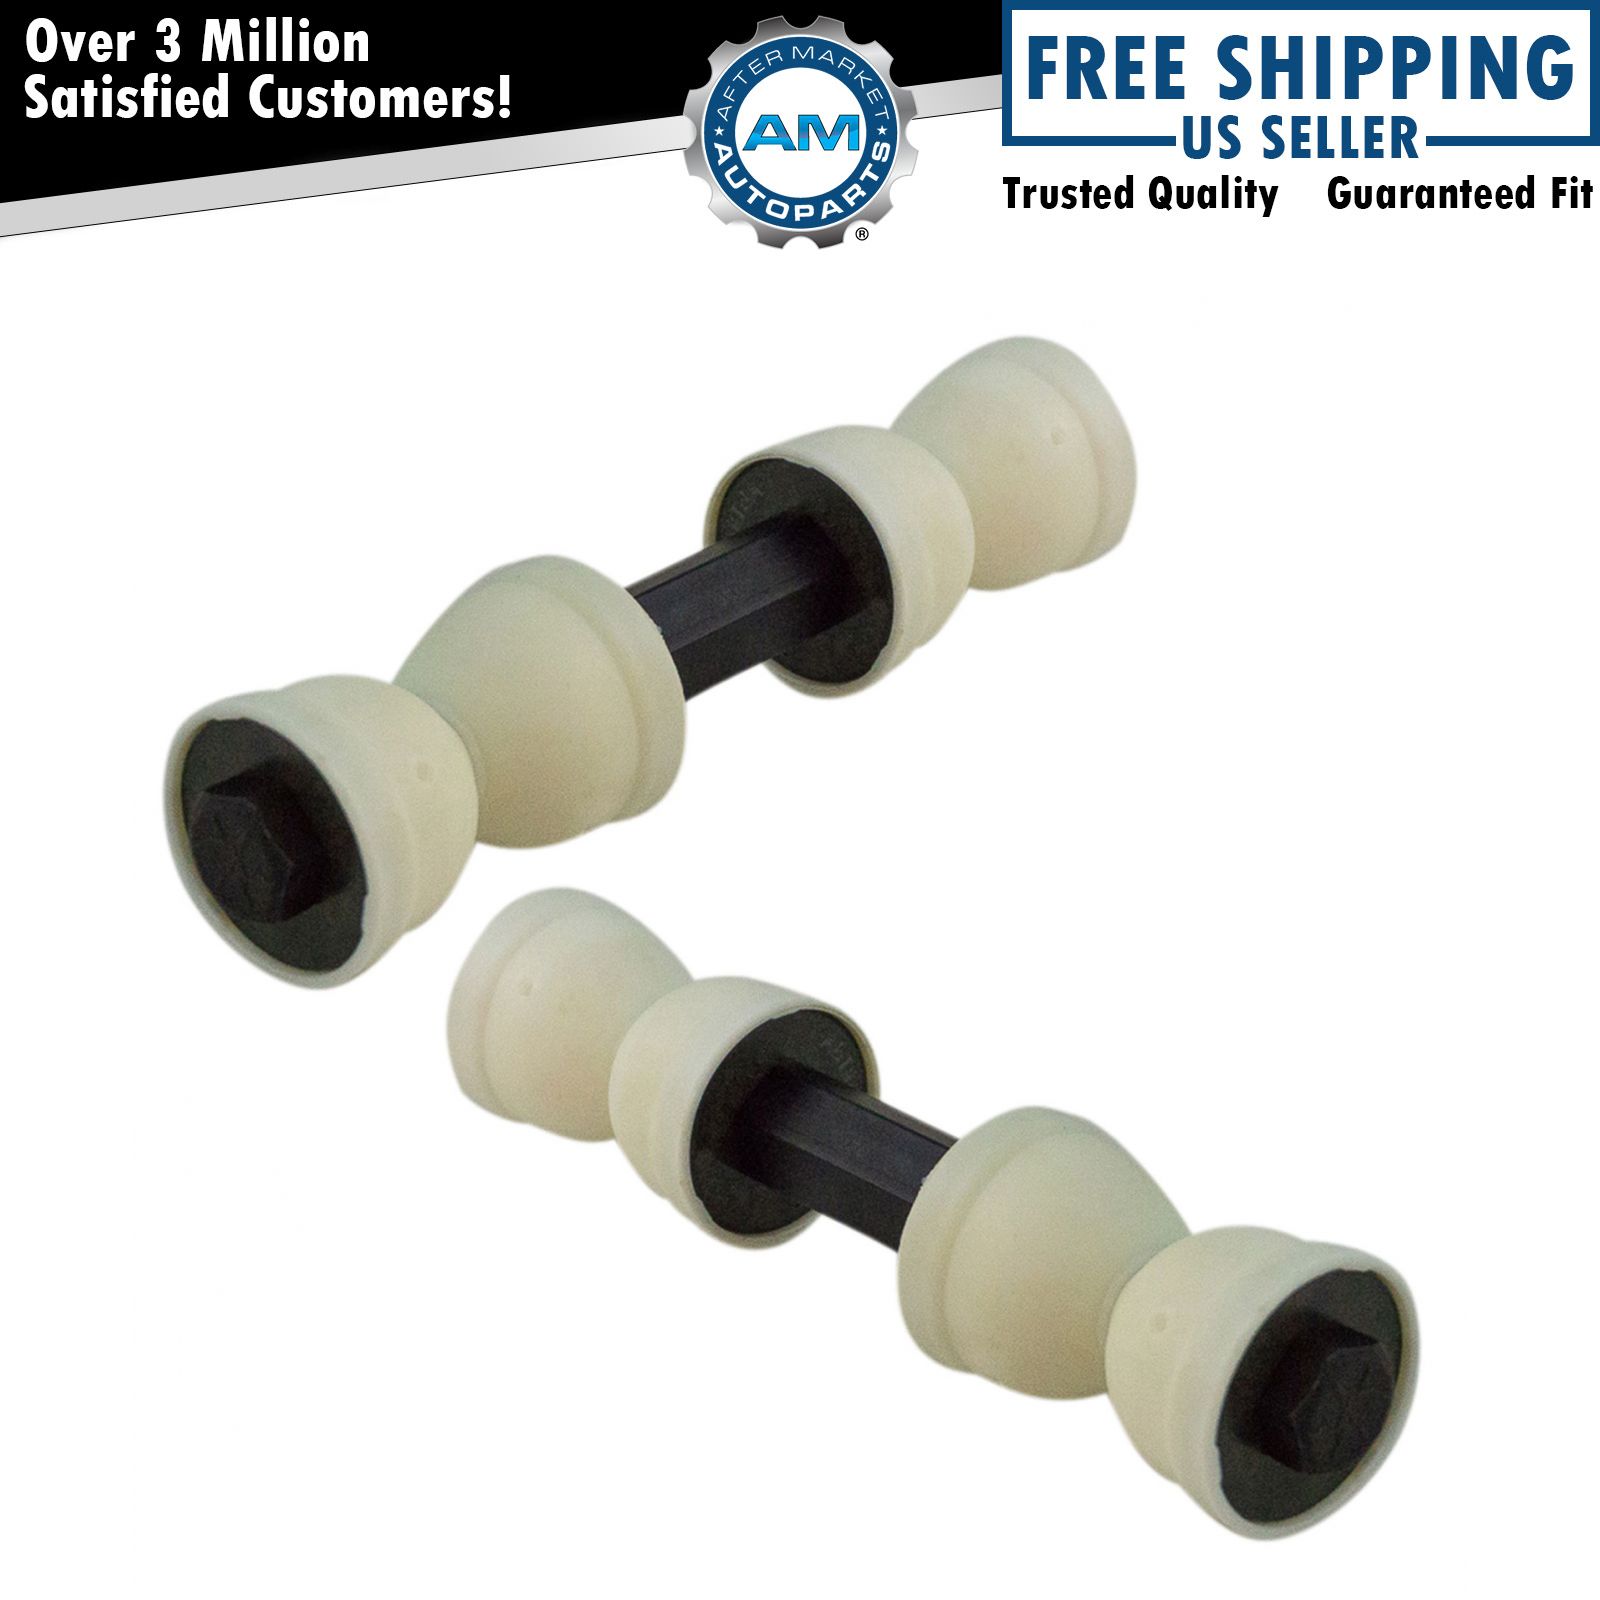 Moog K700528 Sway Bar End Link Pair LH & RH for Chevy GMC Dodge Ford Toyota